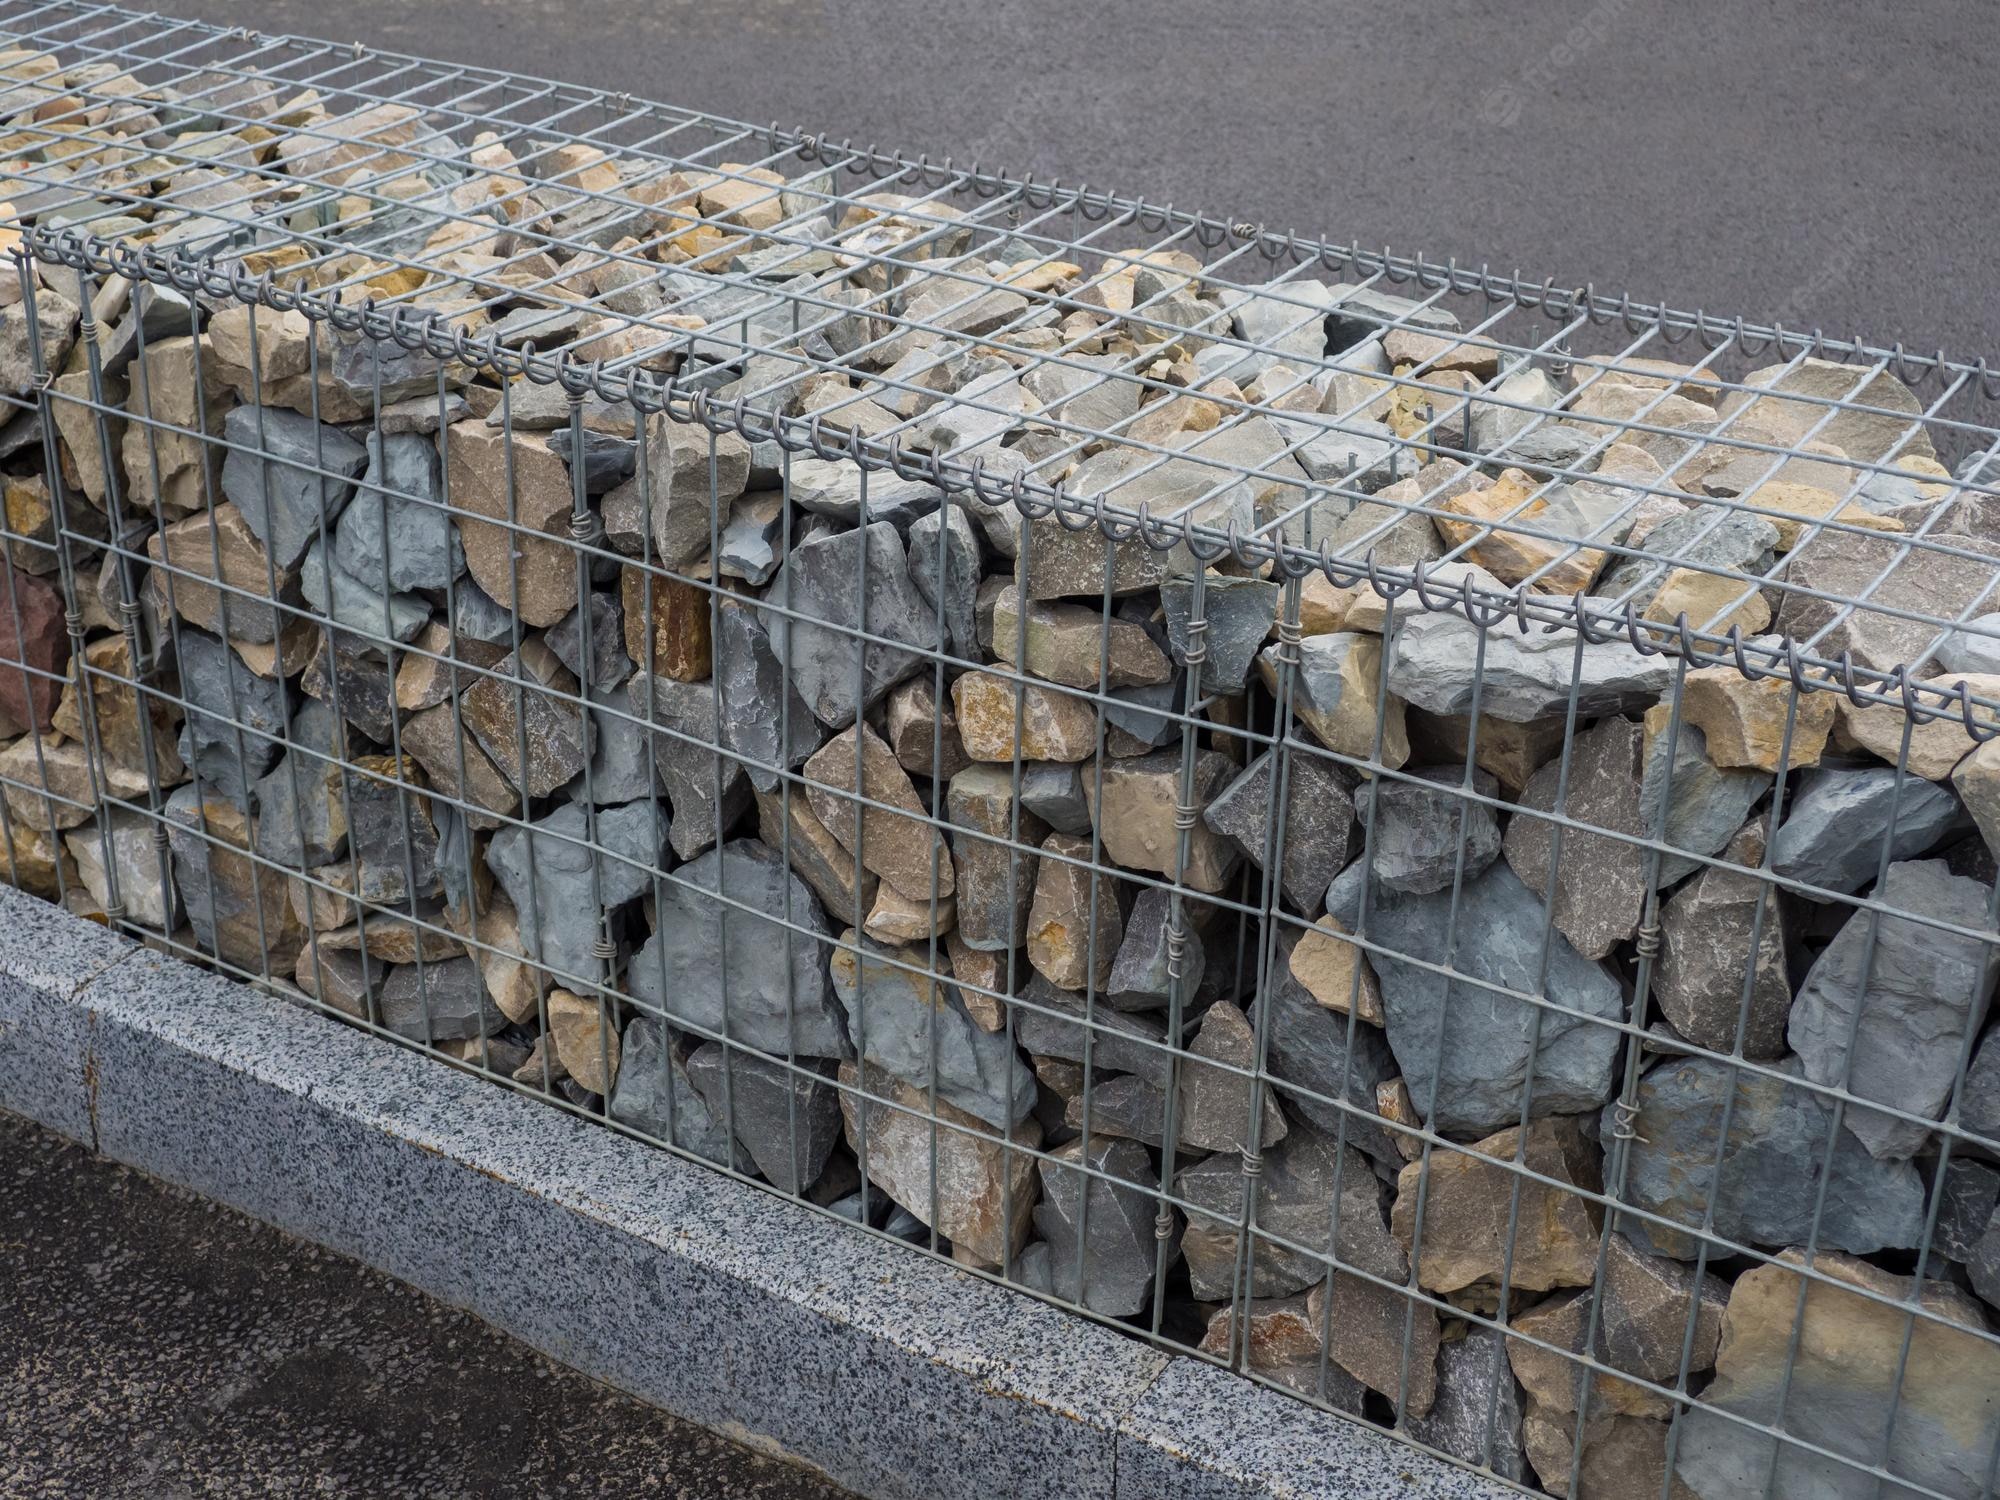 decorative-fence-of-bulk-stone-in-the-grid-textured-background-of-a-stone-wall-with-iron-netting-stone-wall-in-wire-frame-gabion-filled-with-limestone_358403-1123.jpeg